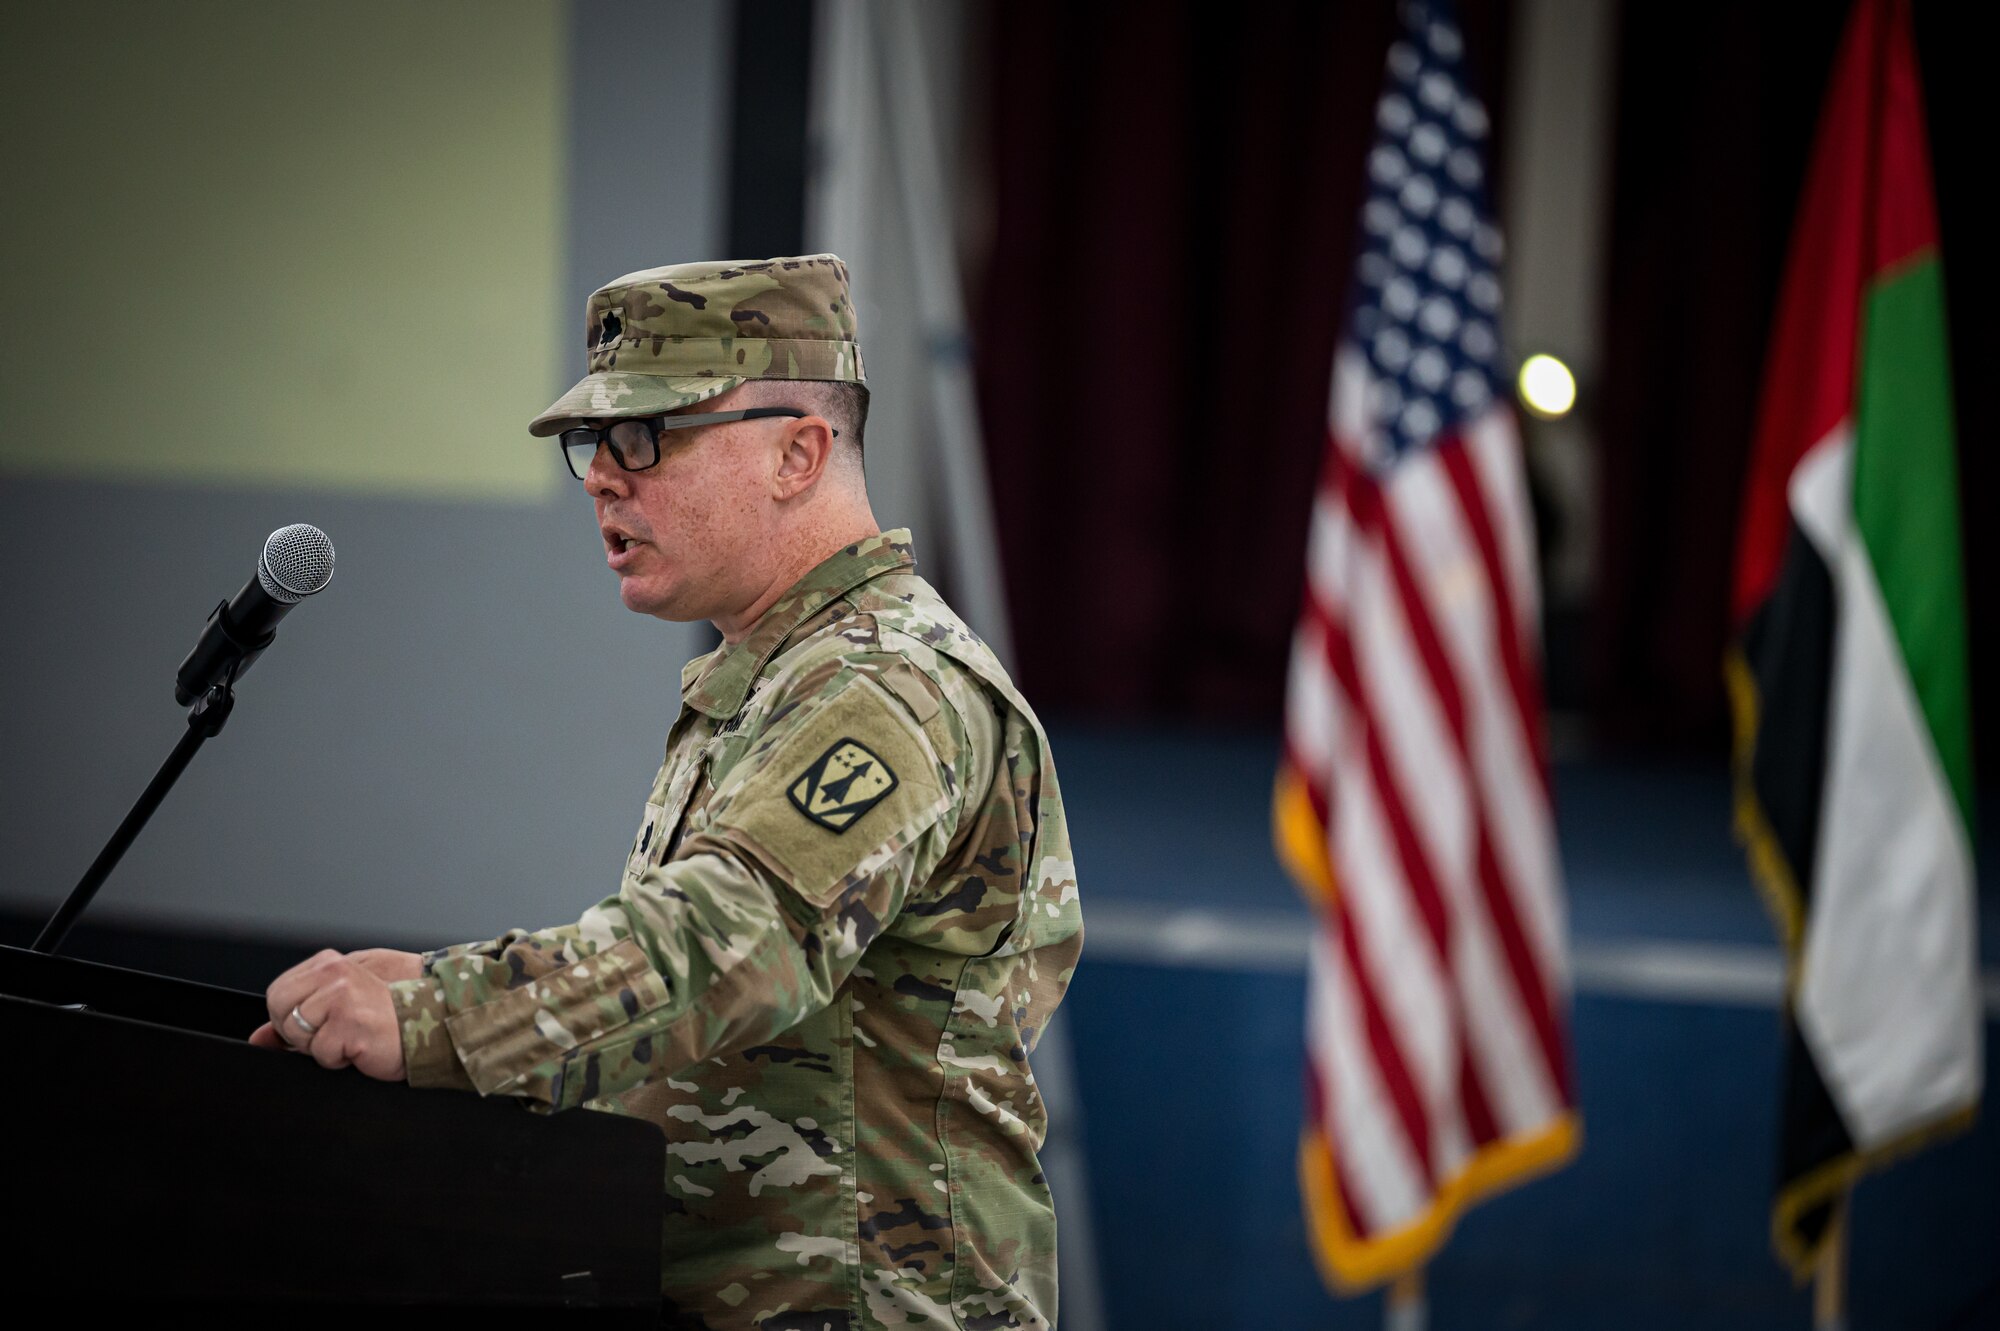 U.S. Army Lt. Col. Paul Mendoza, Commander of the 4th Battalion 3rd Air Defense Artillery Regiment (4-3 ADA), gives remarks at the 4-3 ADA Regiment Transfer of Authority to the 2nd Battalion 43rd Air Defense Artillery Regiment (2-43 ADA) on Jan. 26, 2023, Al Dhafra Air Base, United Arab Emirates. The 4-3 ADA redeployed to Ft. Sill, Oklahoma, following transferring command of the MIM-104 Patriot Missile Defense Systems at Al Dhafra AB to the 2-43 ADA.